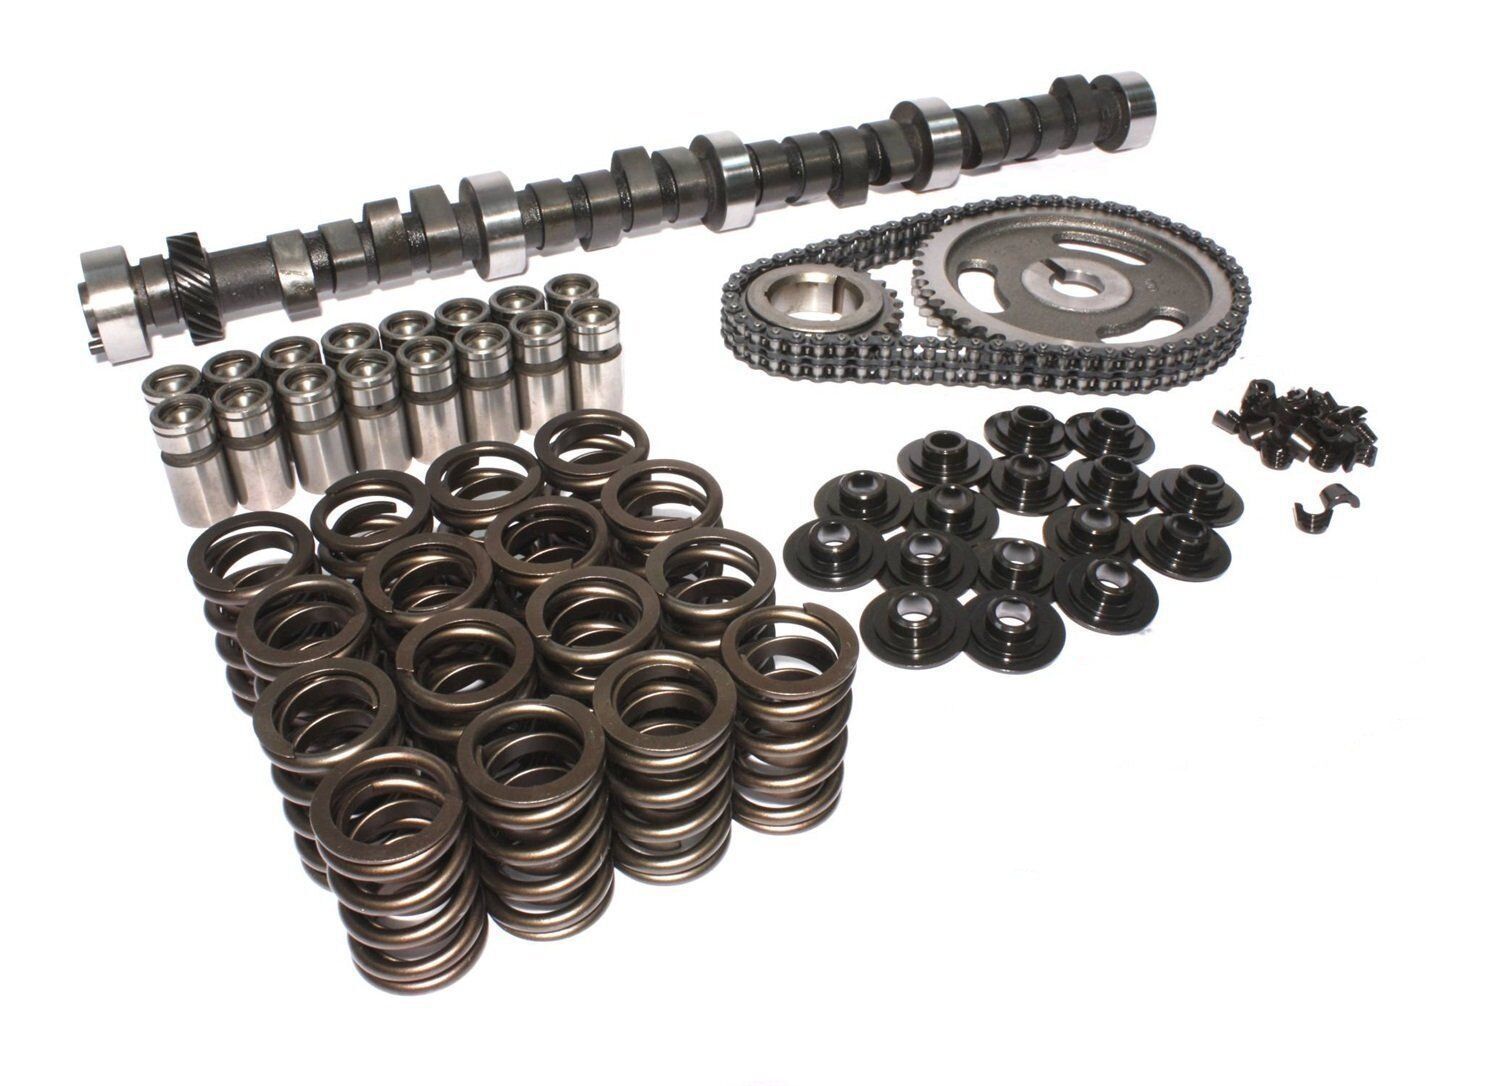 STAGE-3 Ultimate Cam Kit w/Lifters+Springs+Gaskets Chevy 283 327 350 .458 lift